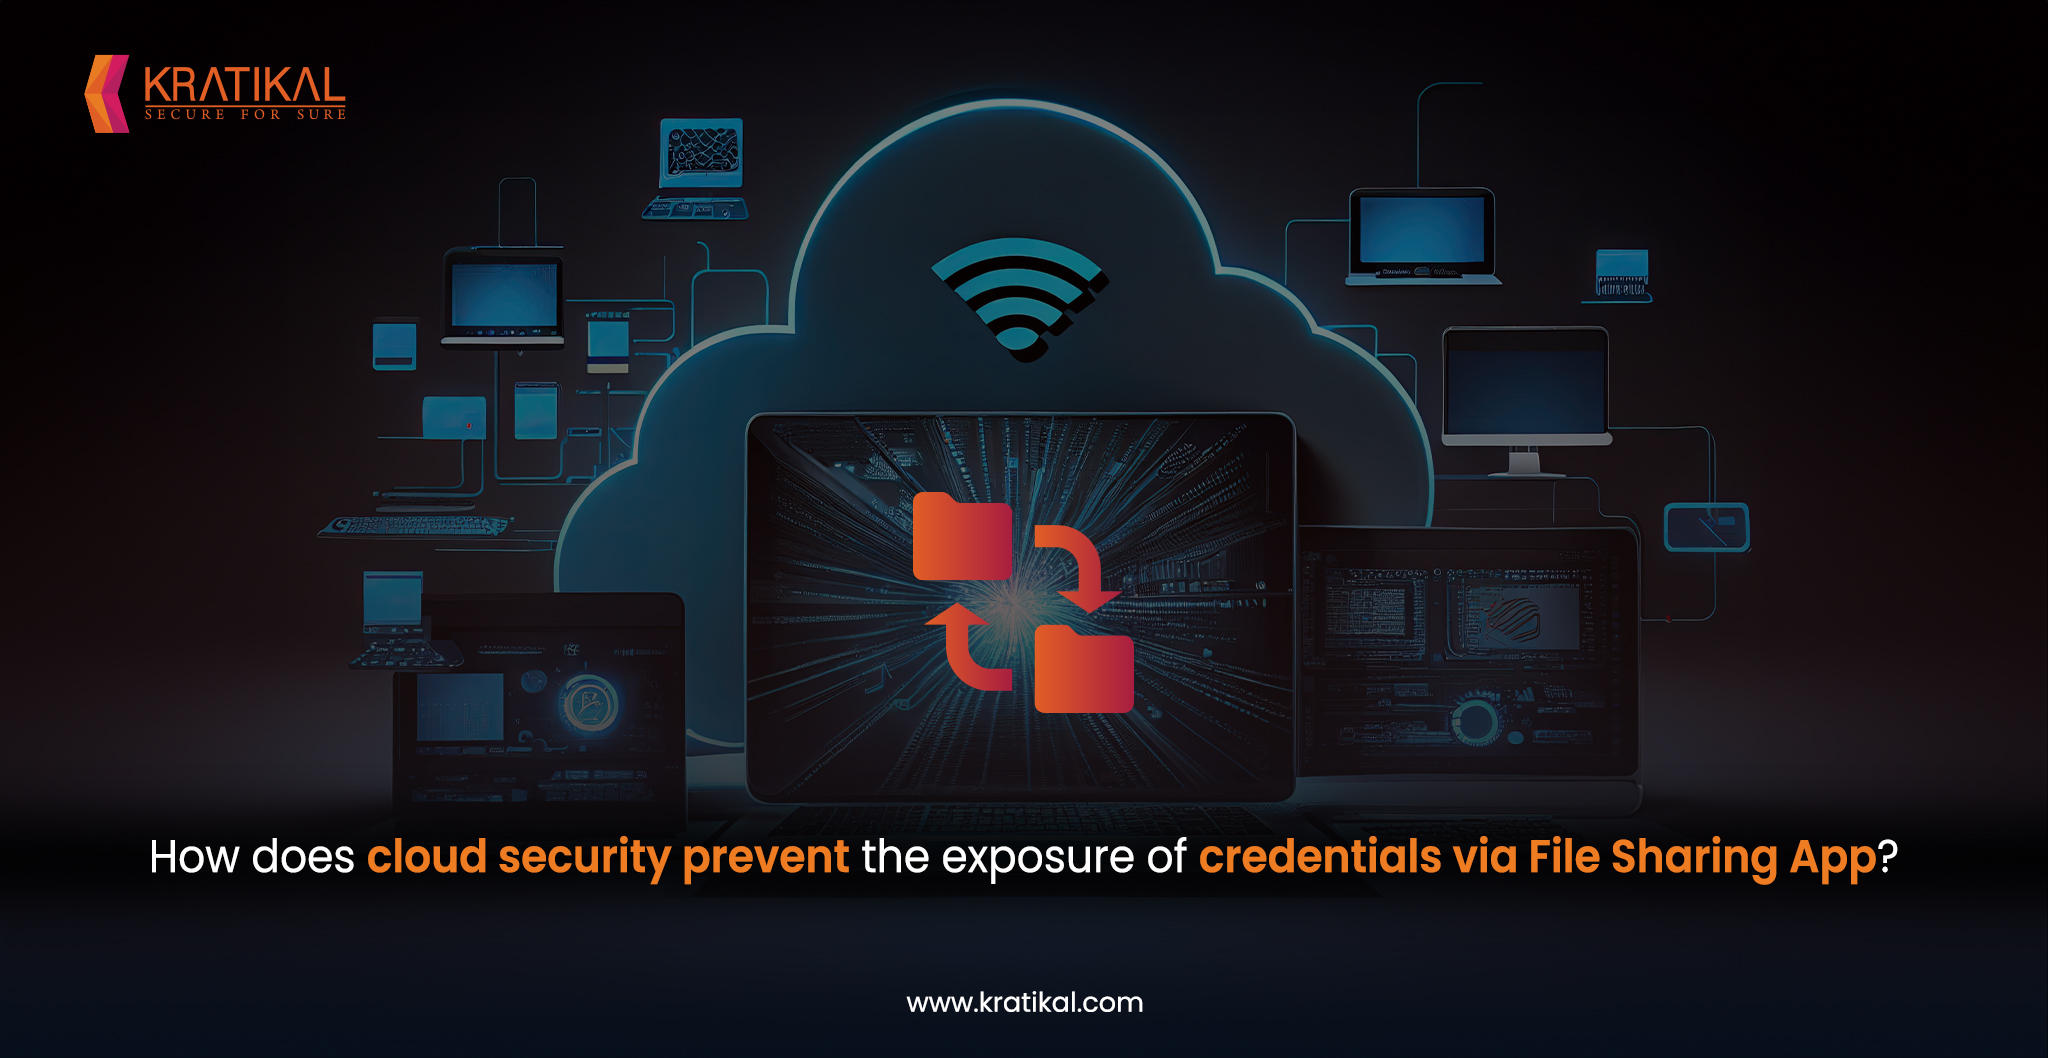 How can Cloud Security Prevent Exposure of Credentials via File Sharing App?